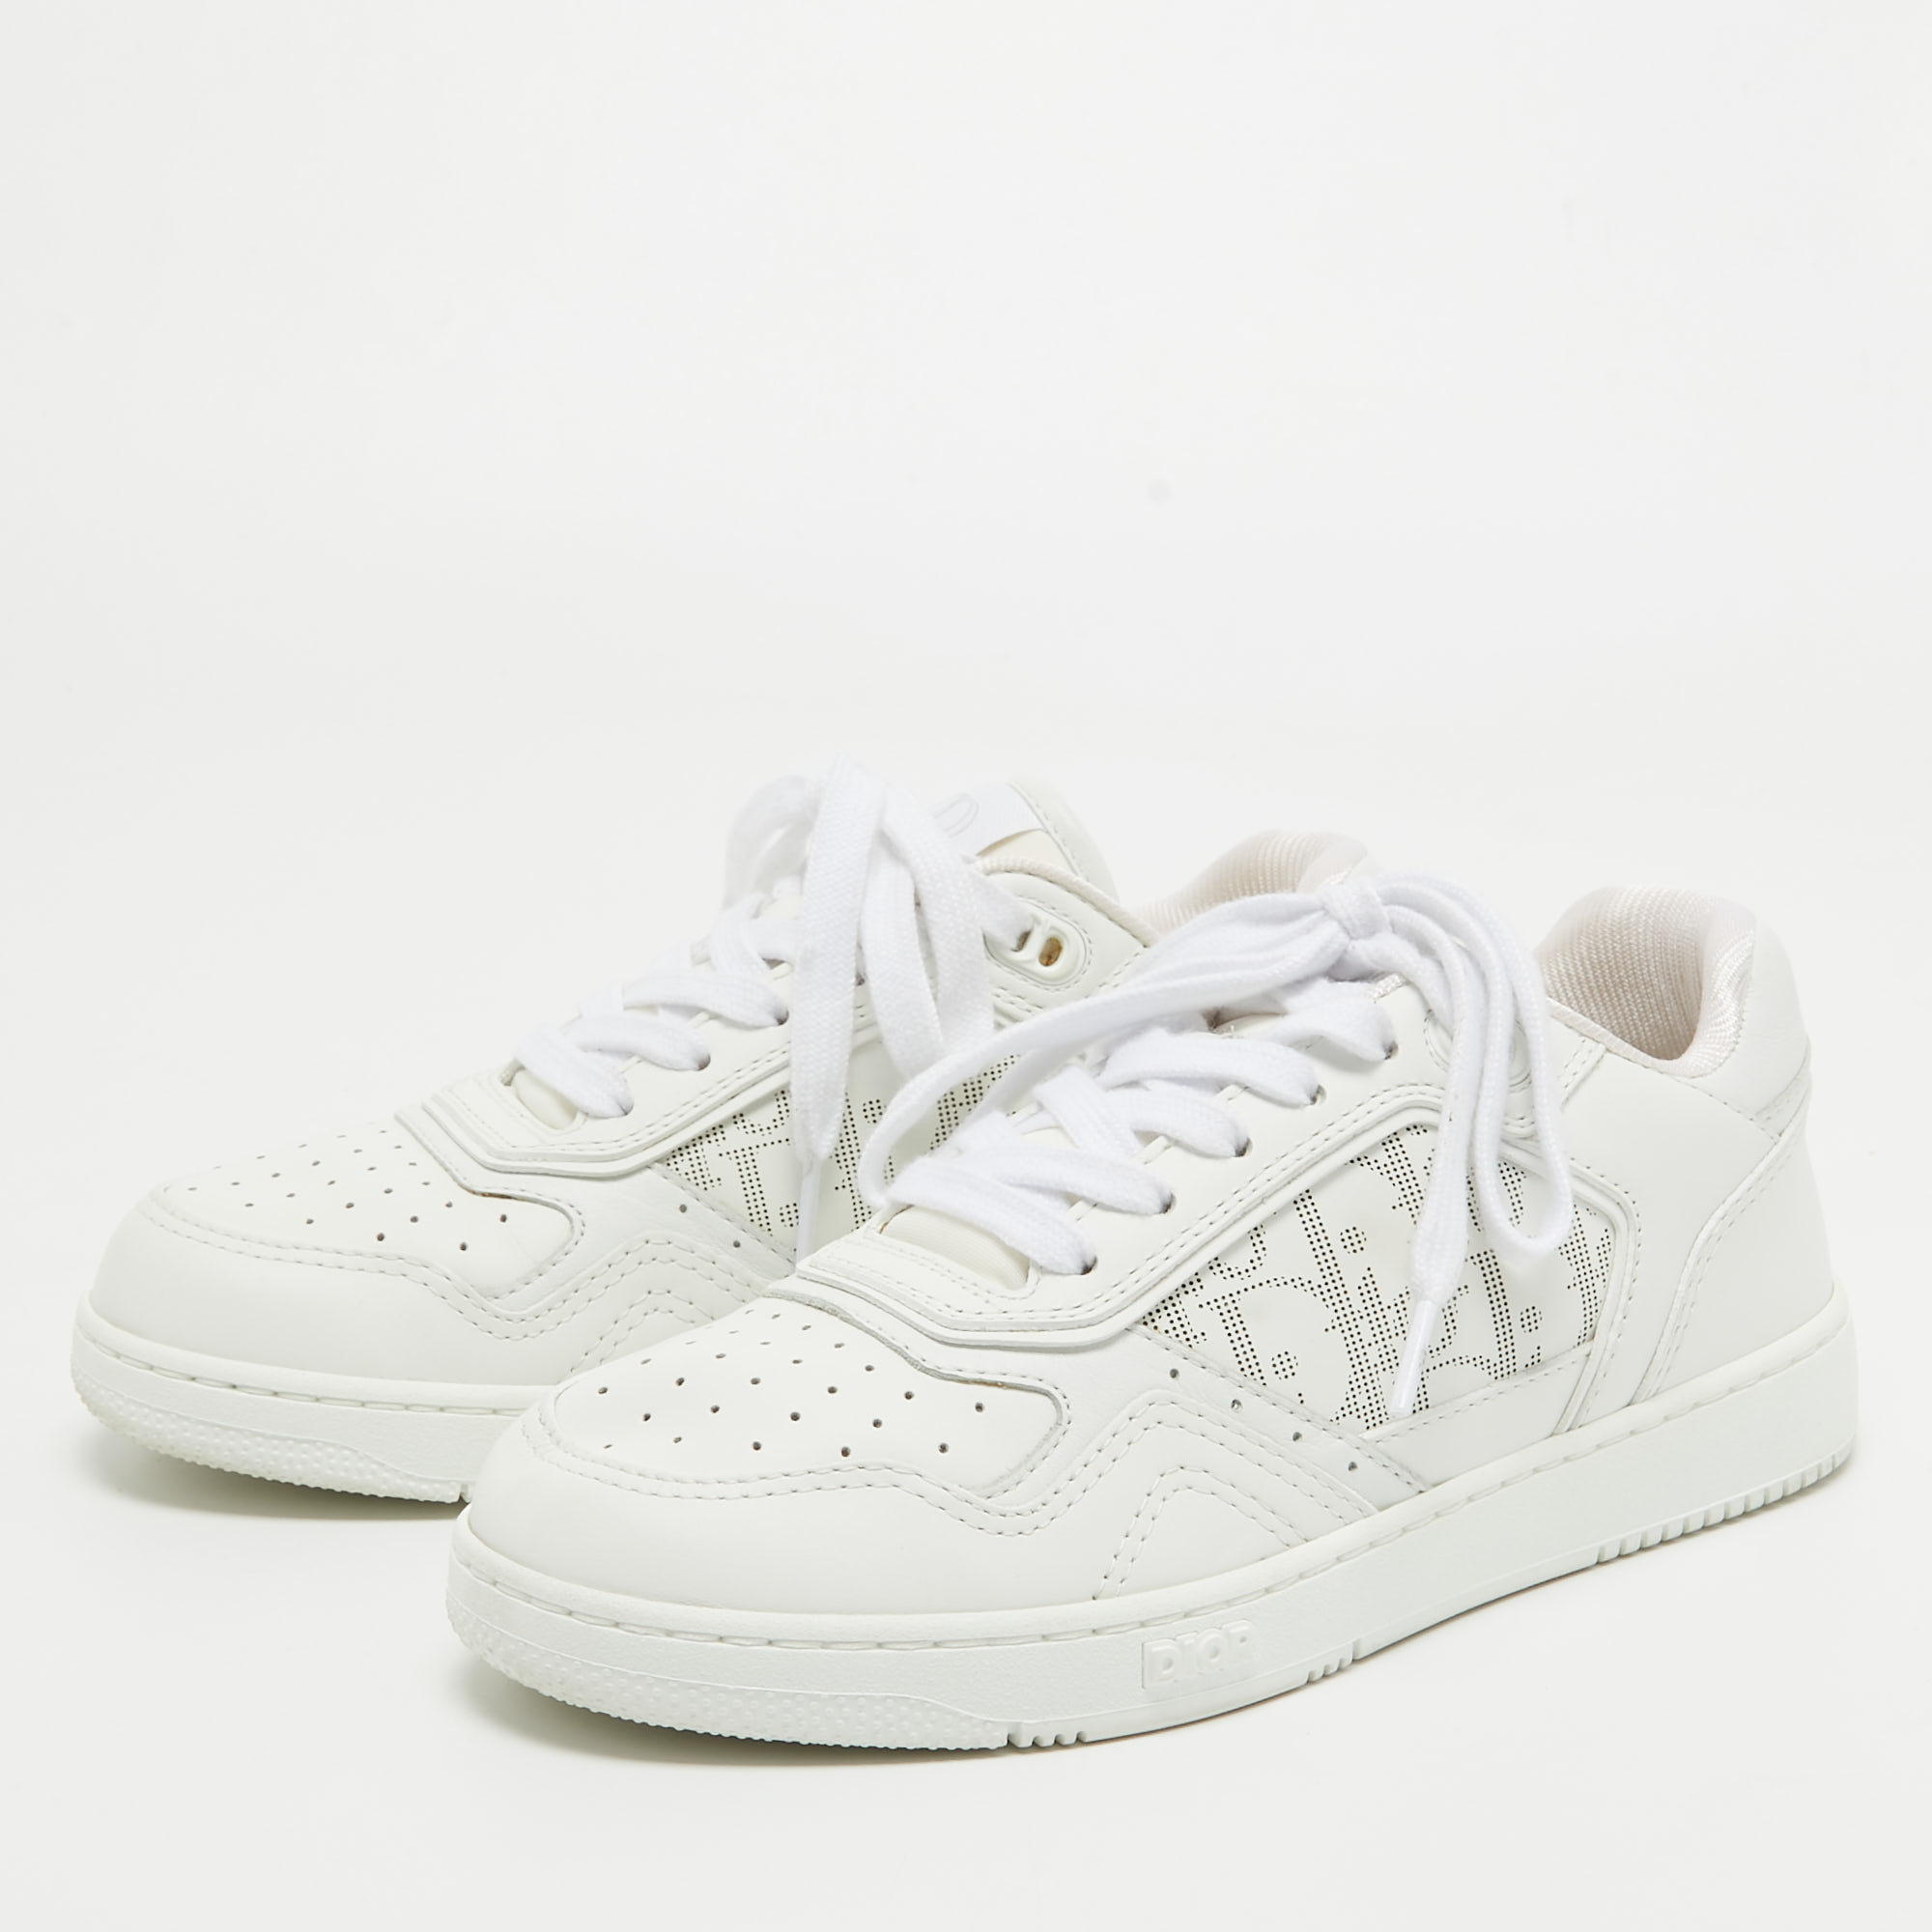 

Dior White Leather B27 Low Top Sneakers Size